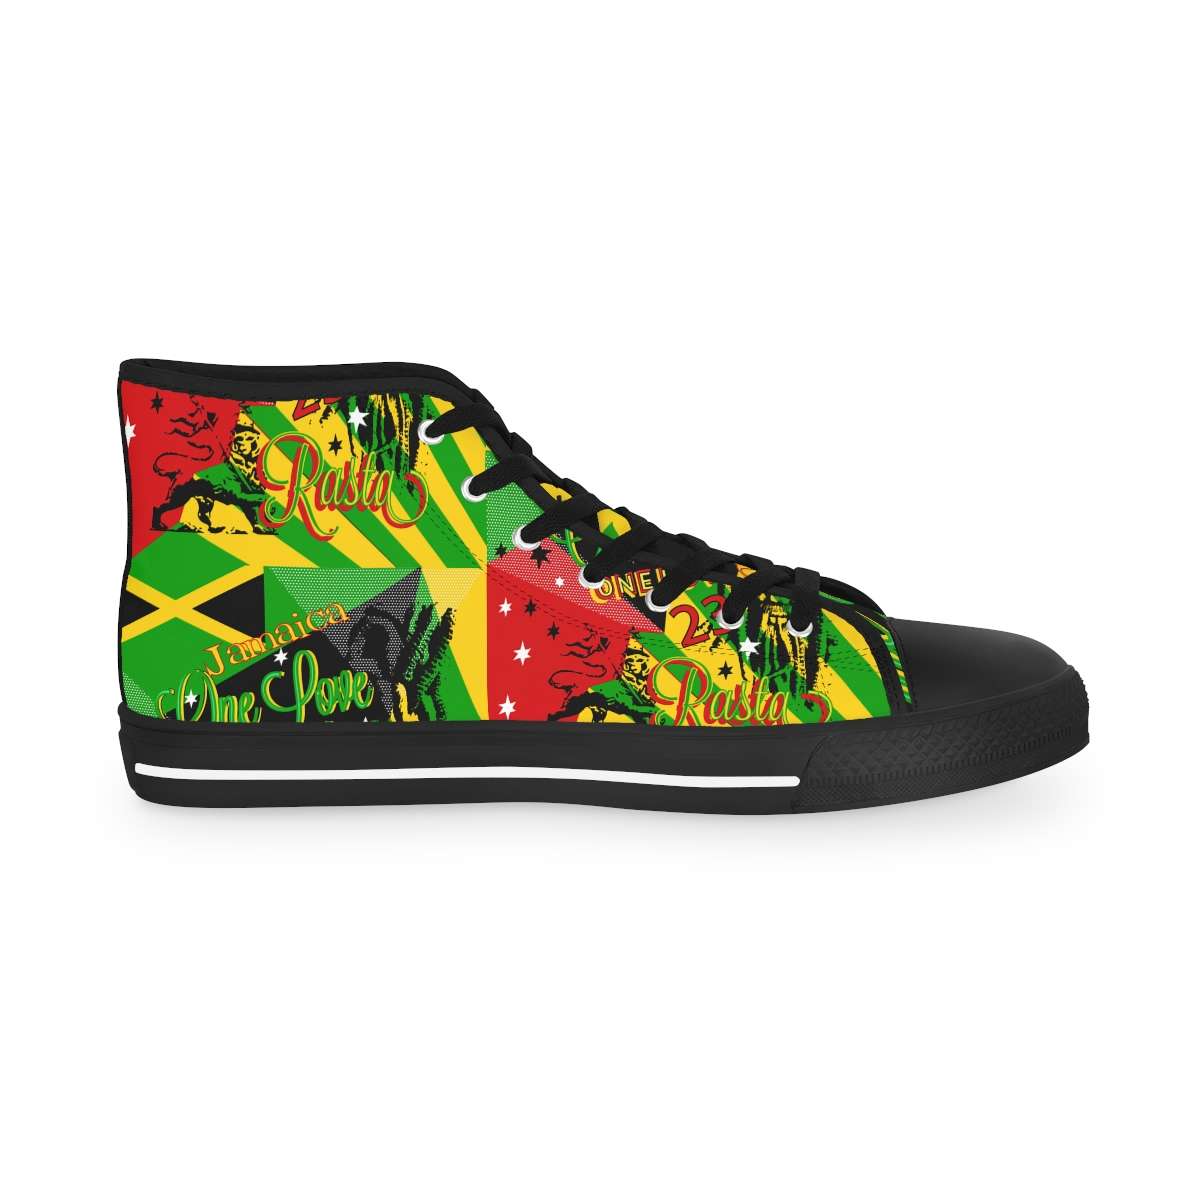 Rasta Reggae Party Men's High Top Sneakers in the Reggae colors left outside view black sole